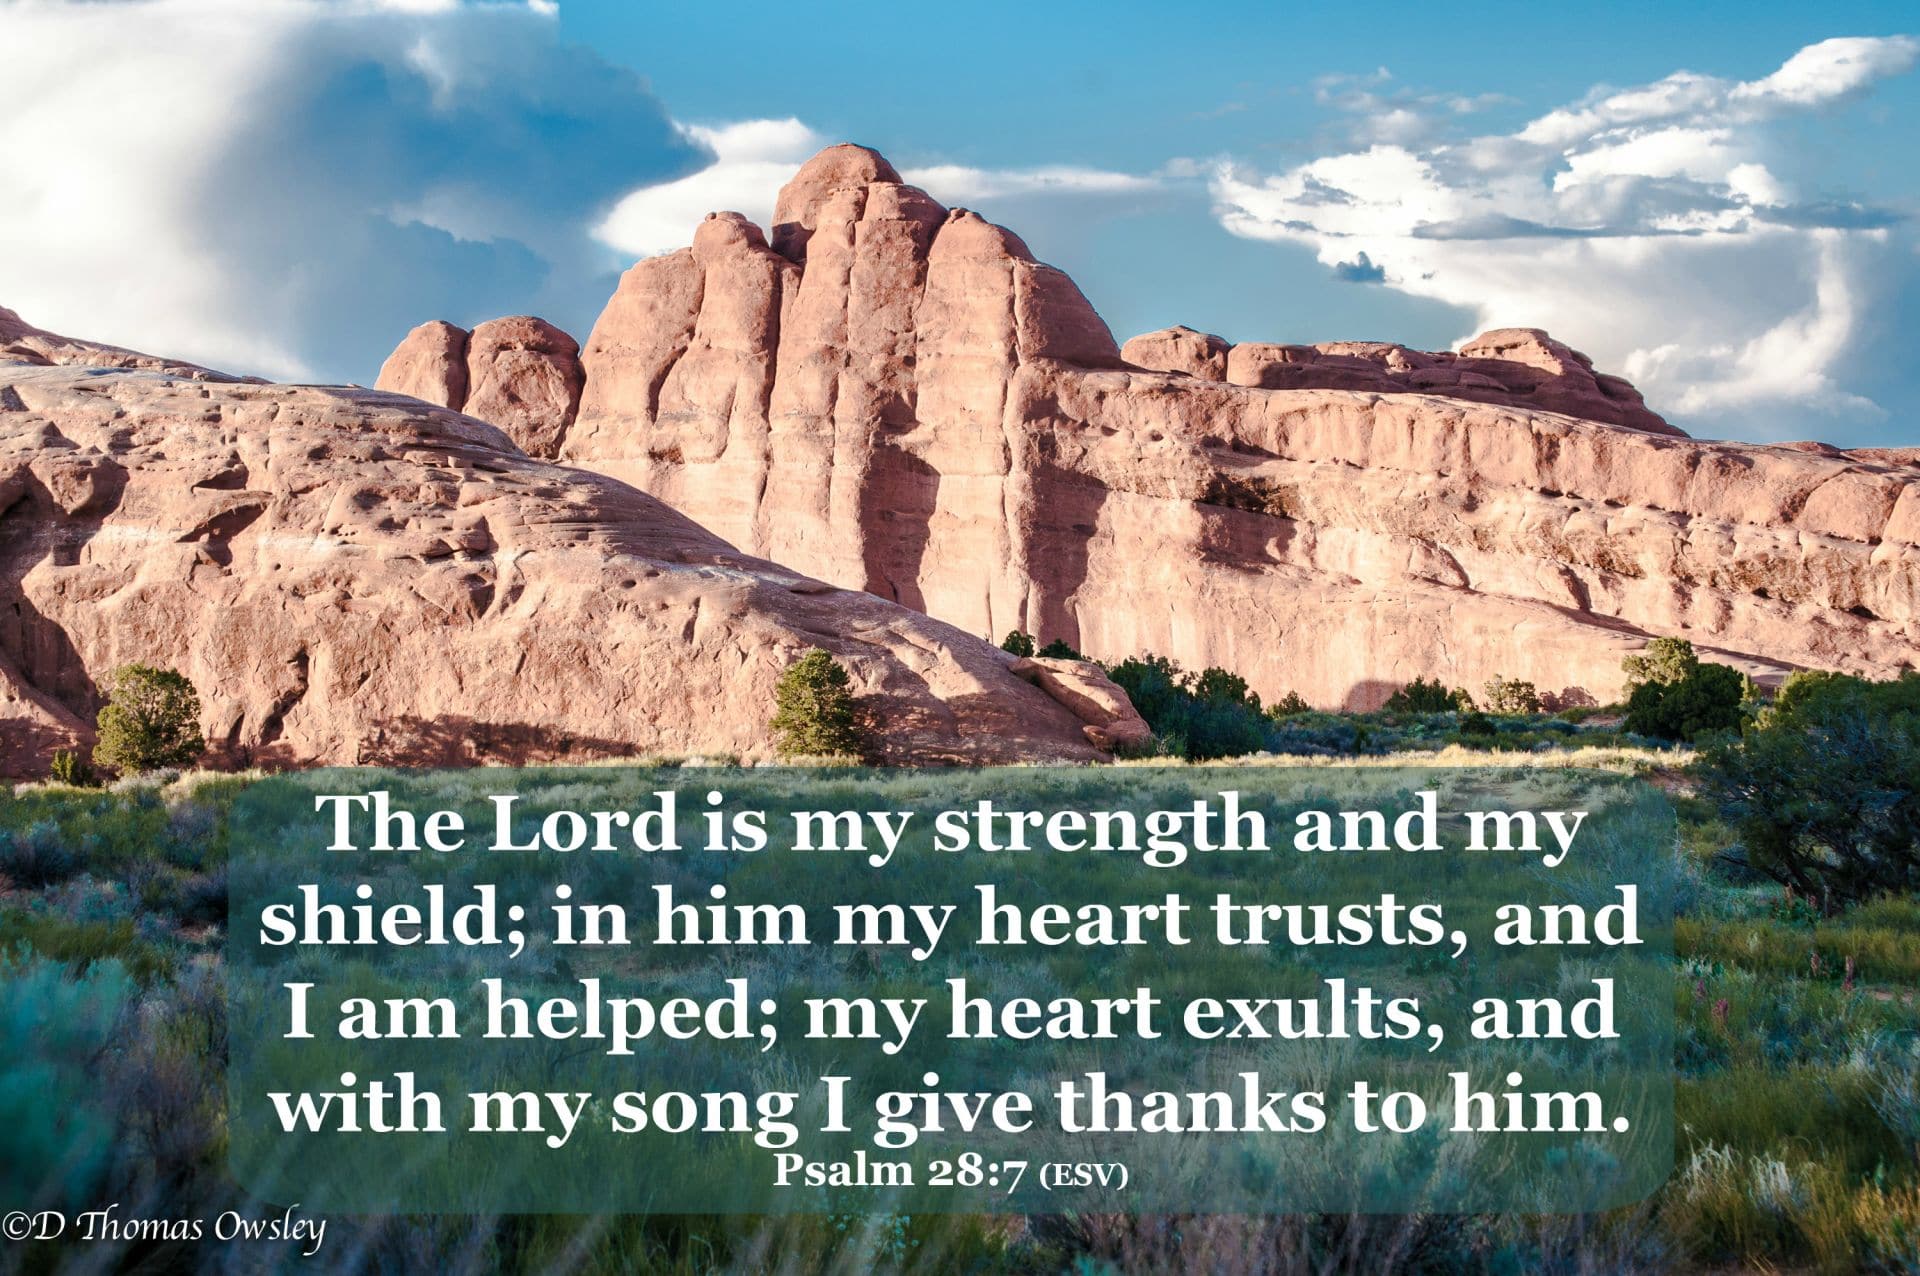 The Lord is my strength and shield; in him my heart trusts, and I am helped...